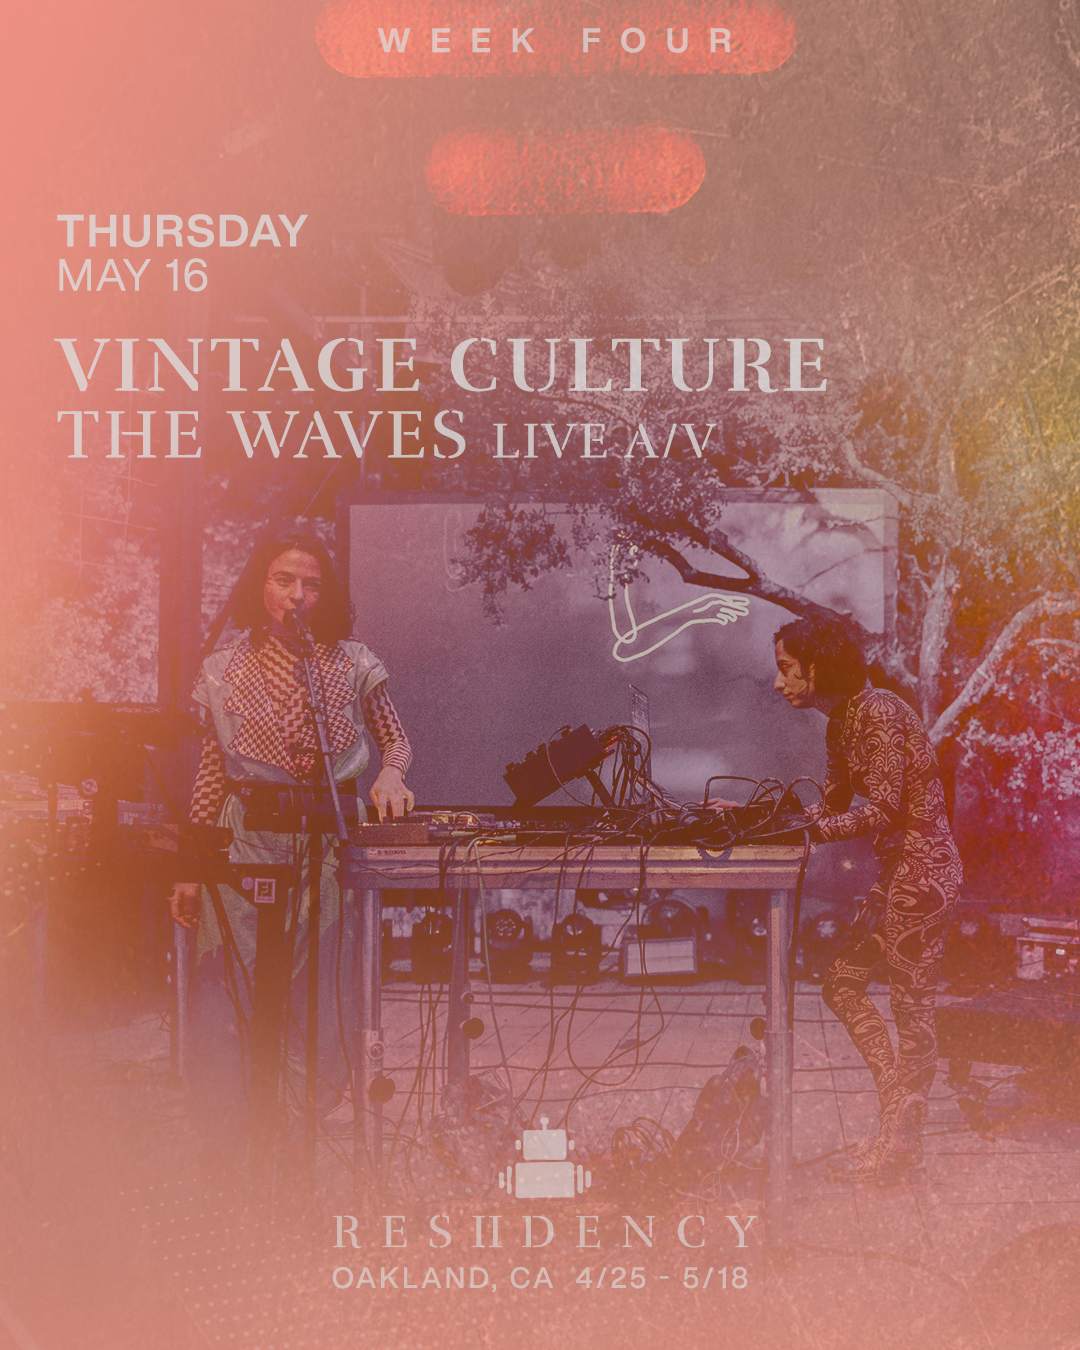 Robot Heart RESIIDENCY - Show 14 - Vintage Culture - The WAVES Live - Página trasera